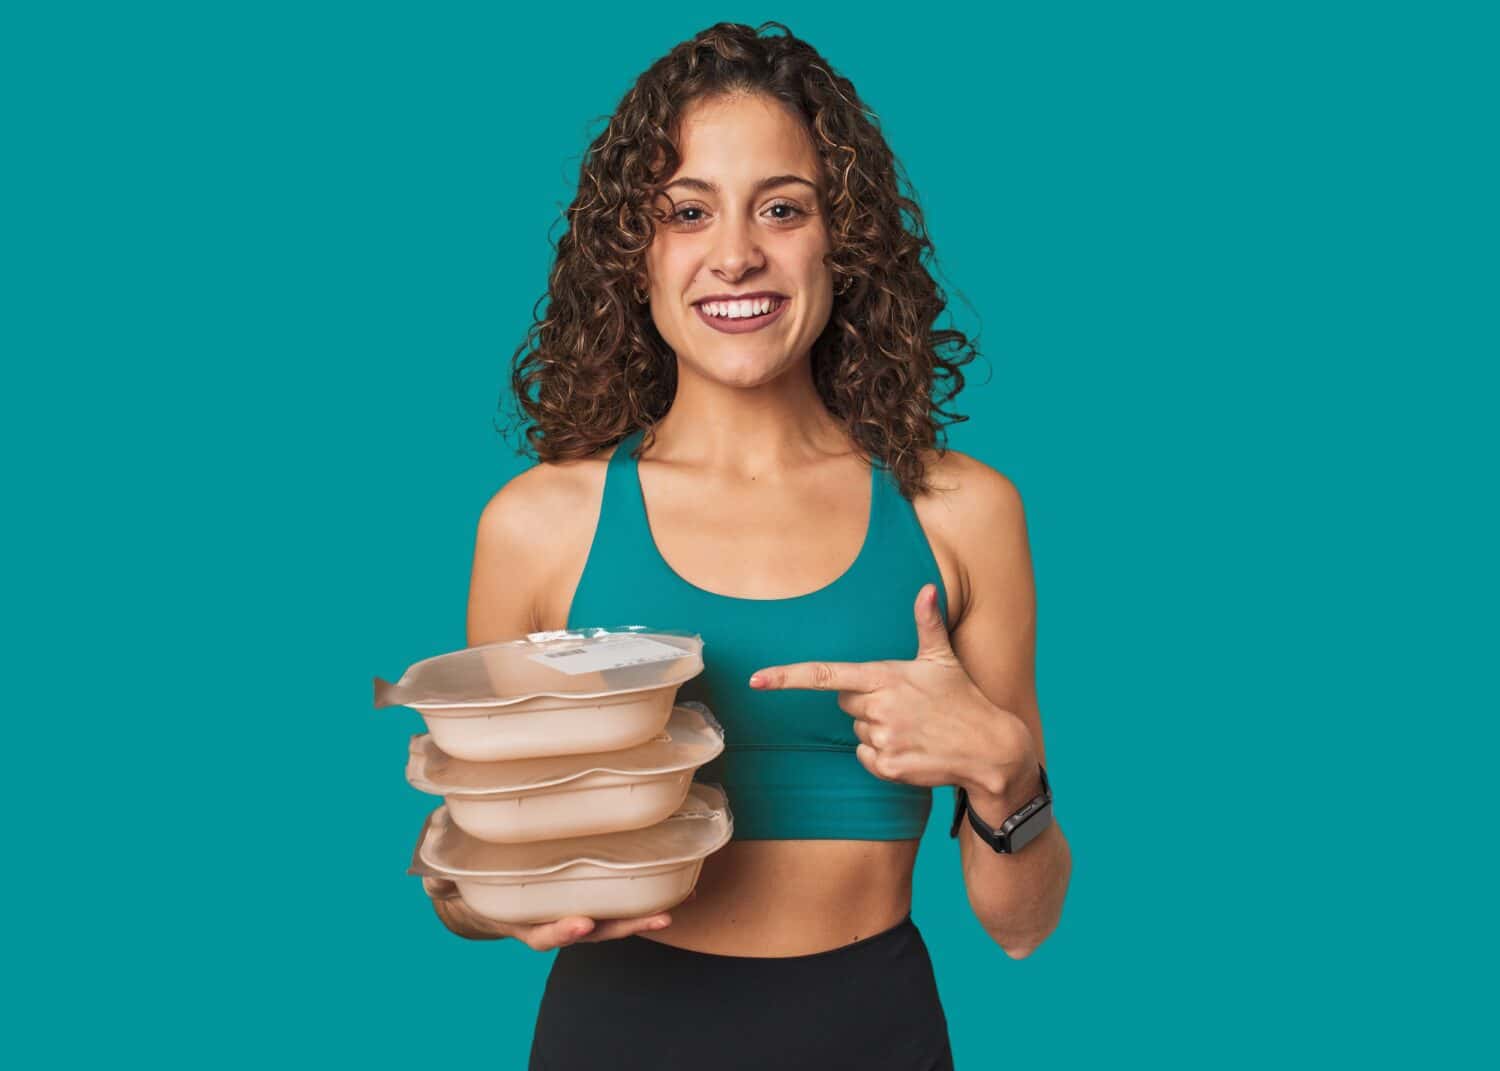 Meal prep made easy! This fitness-minded woman knows the value of planning ahead for healthy, balanced meals all week long.